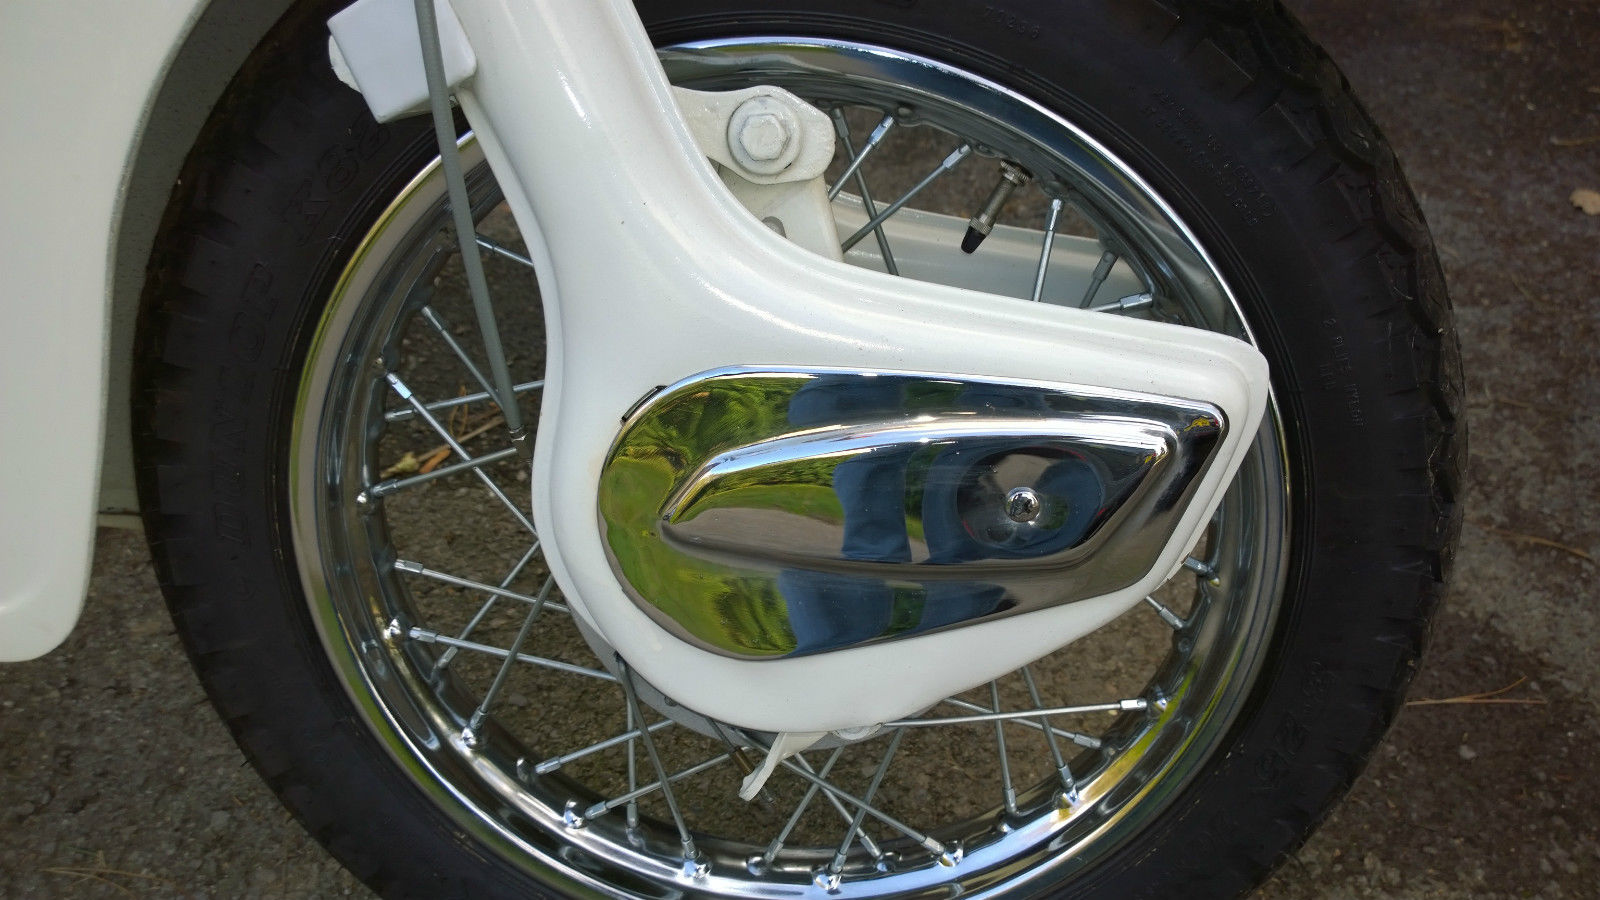 Ariel Arrow - 1962 - Front Suspension Detail, Front Wheel with New Spokes.